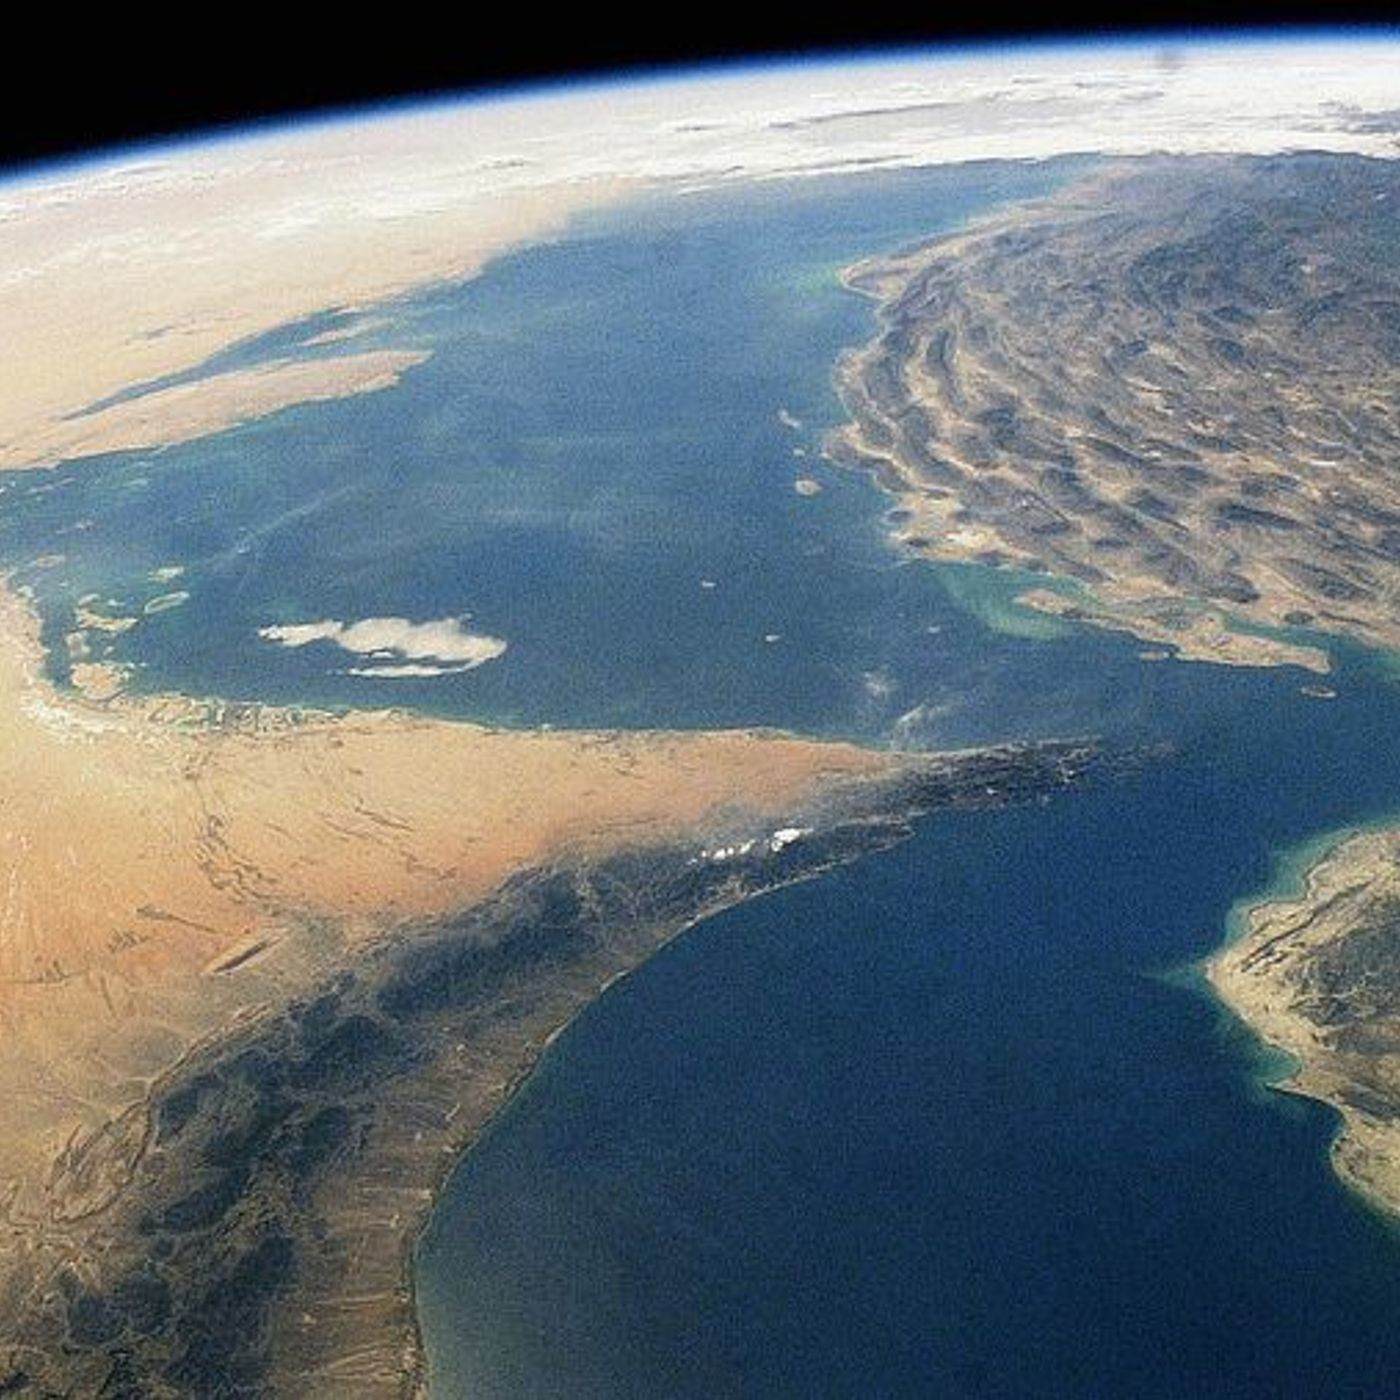 Episode 497: The Once, Past, and Future Strait of Hormuz & Gulf of Oman